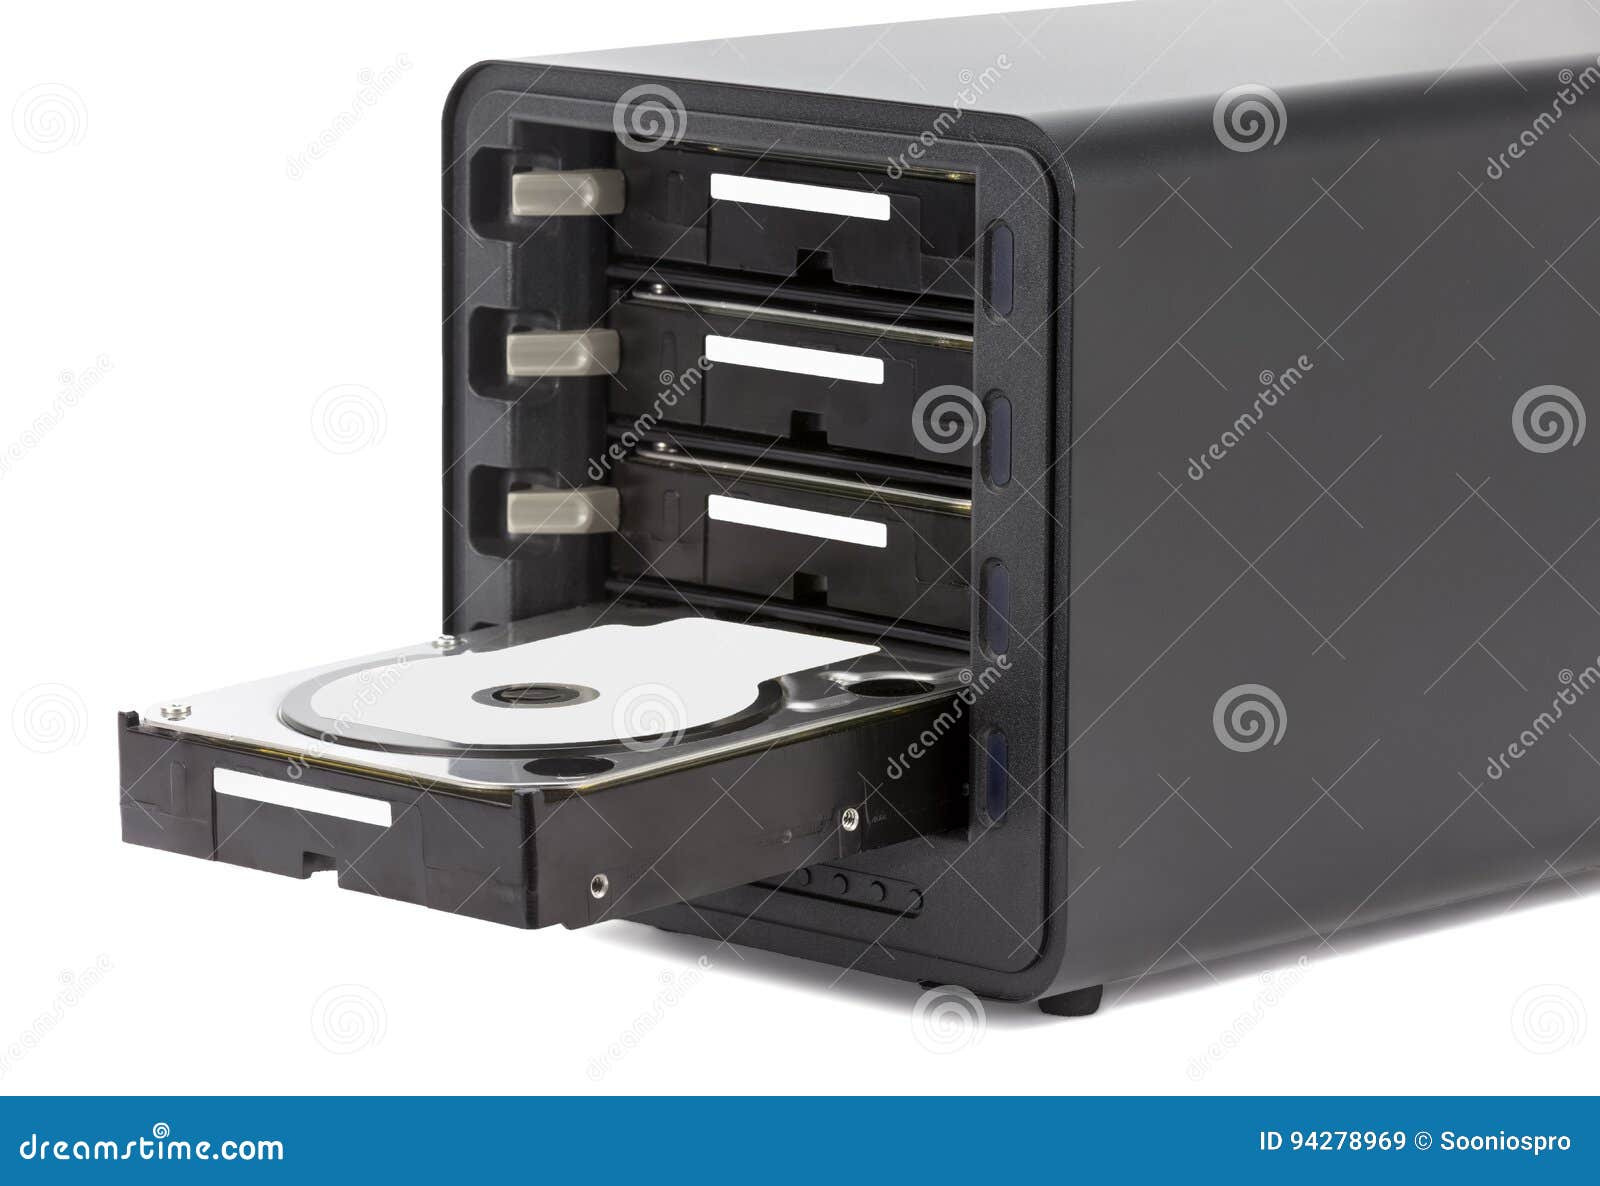 nas, storage connected to the network. several hard drives